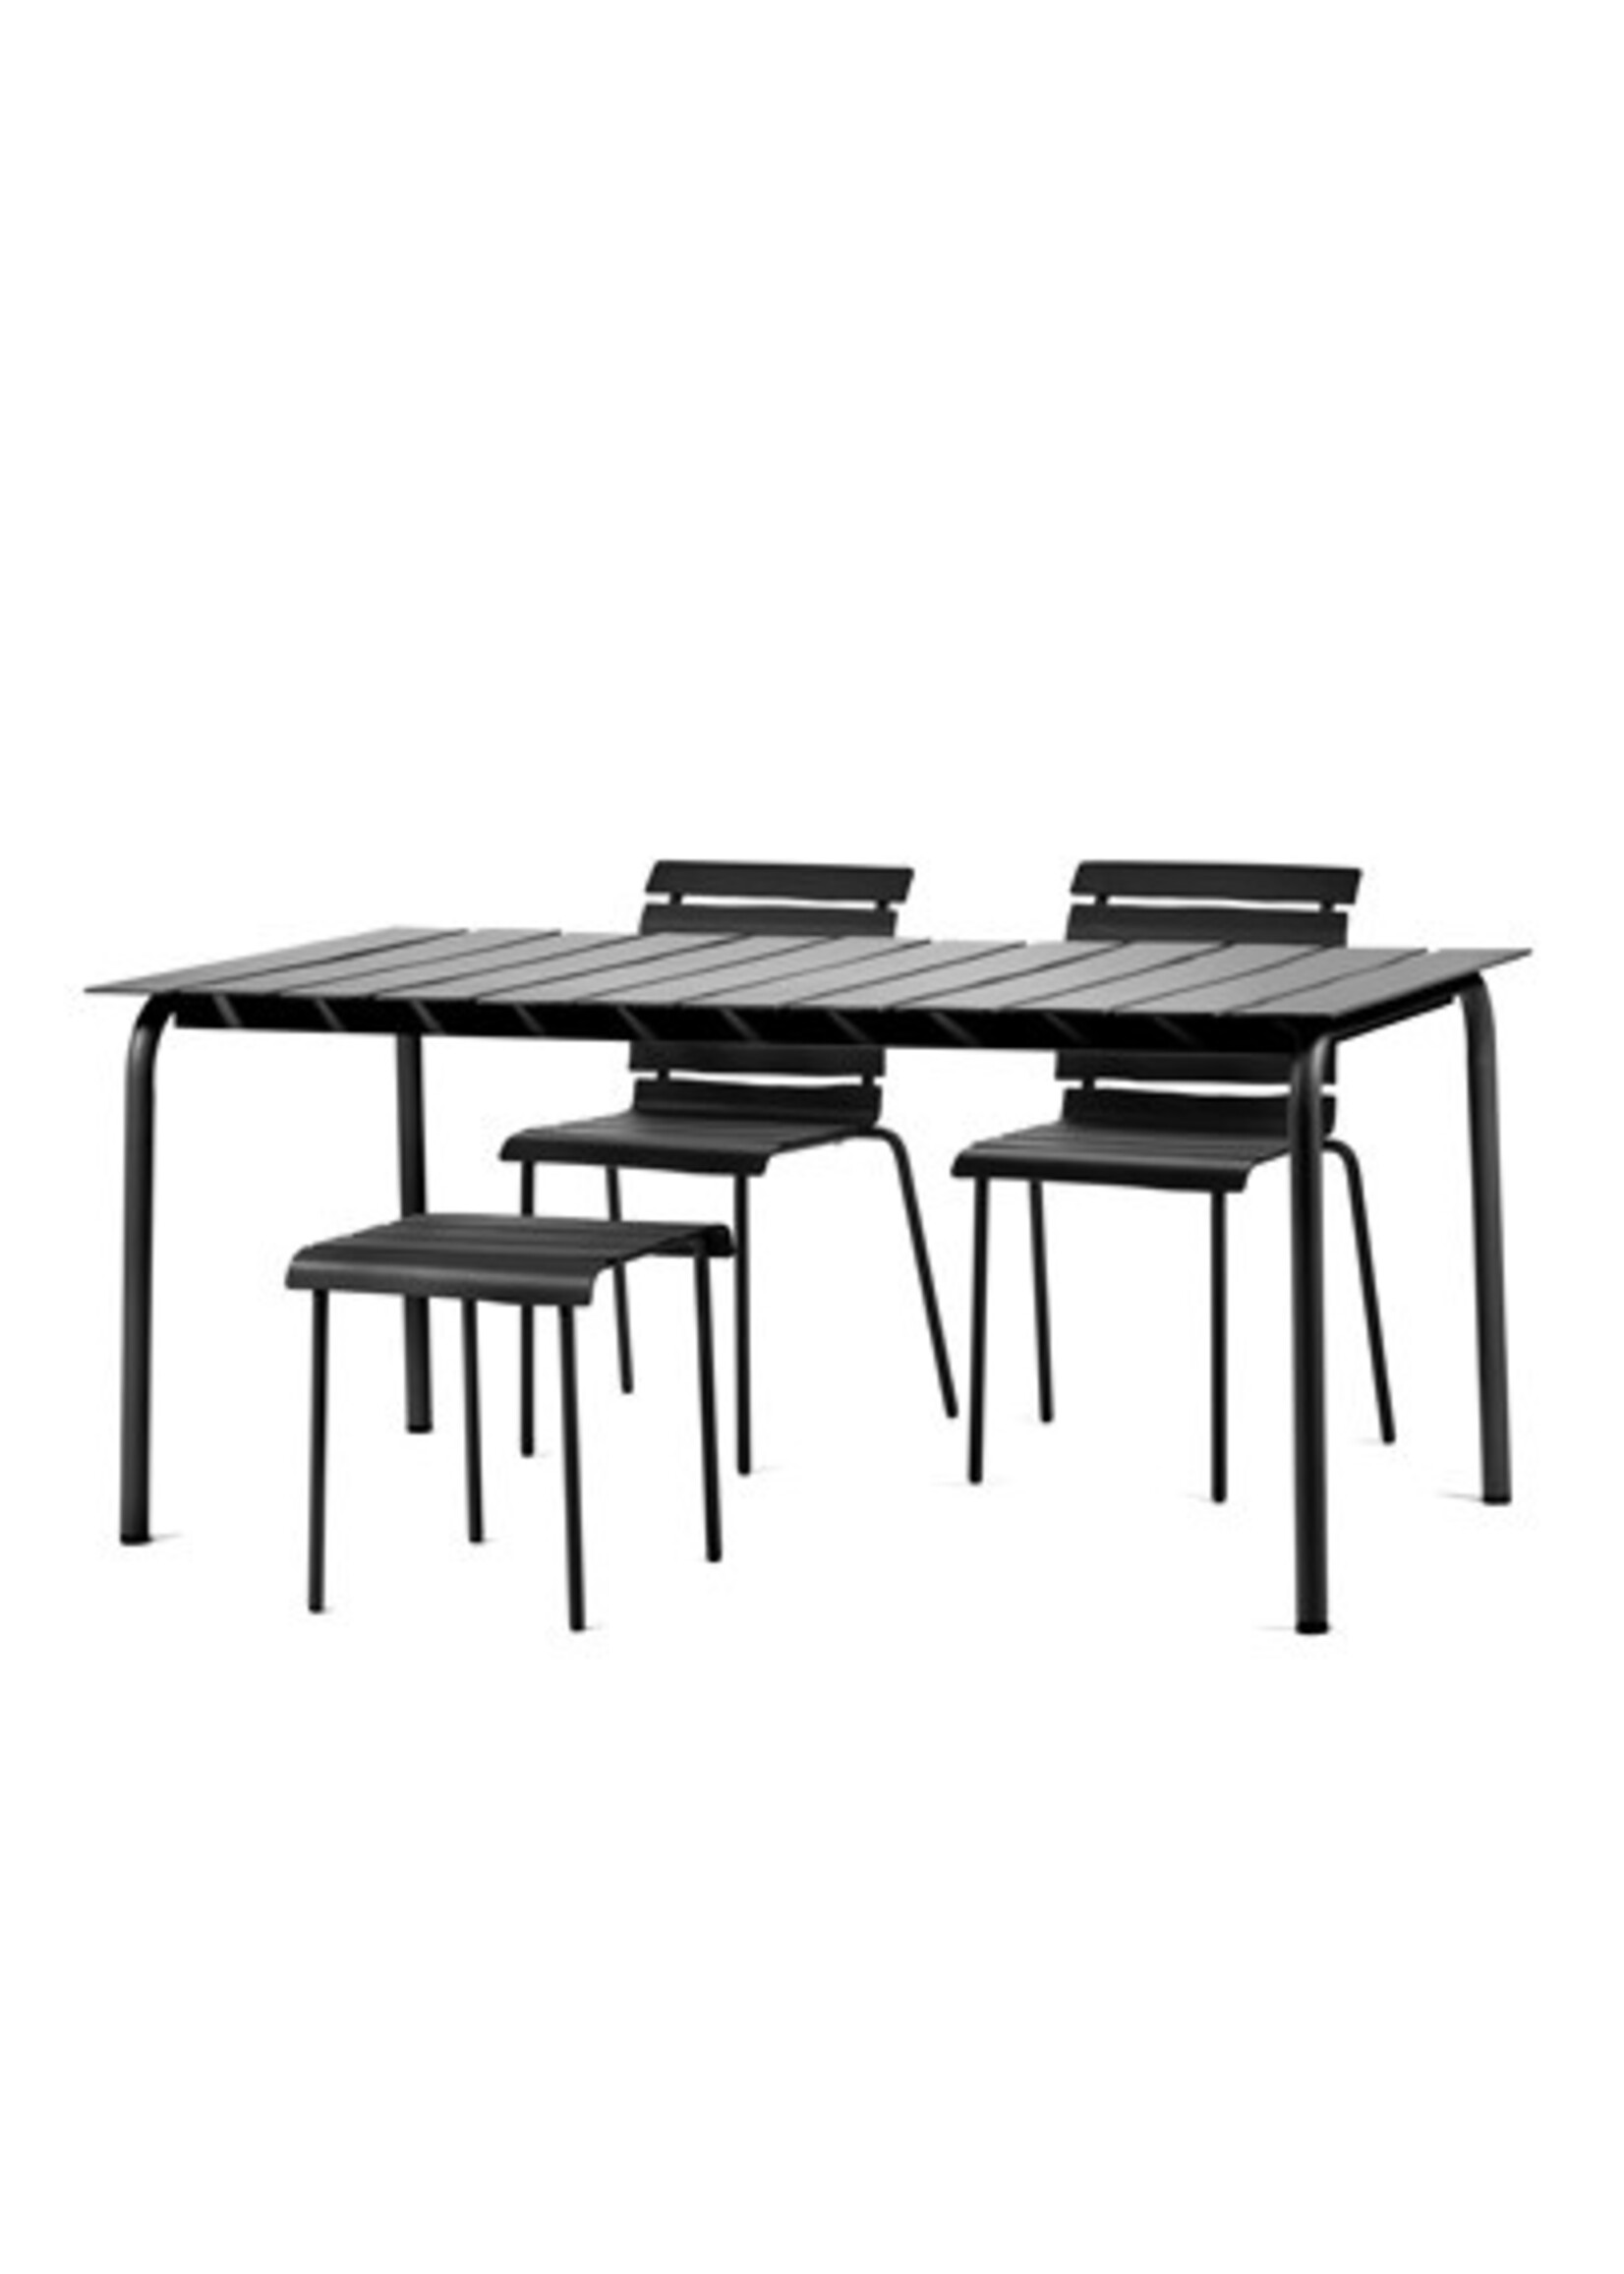 Valerie Objects Aligned -  Outdoor - Dining Table - Black - 170/85